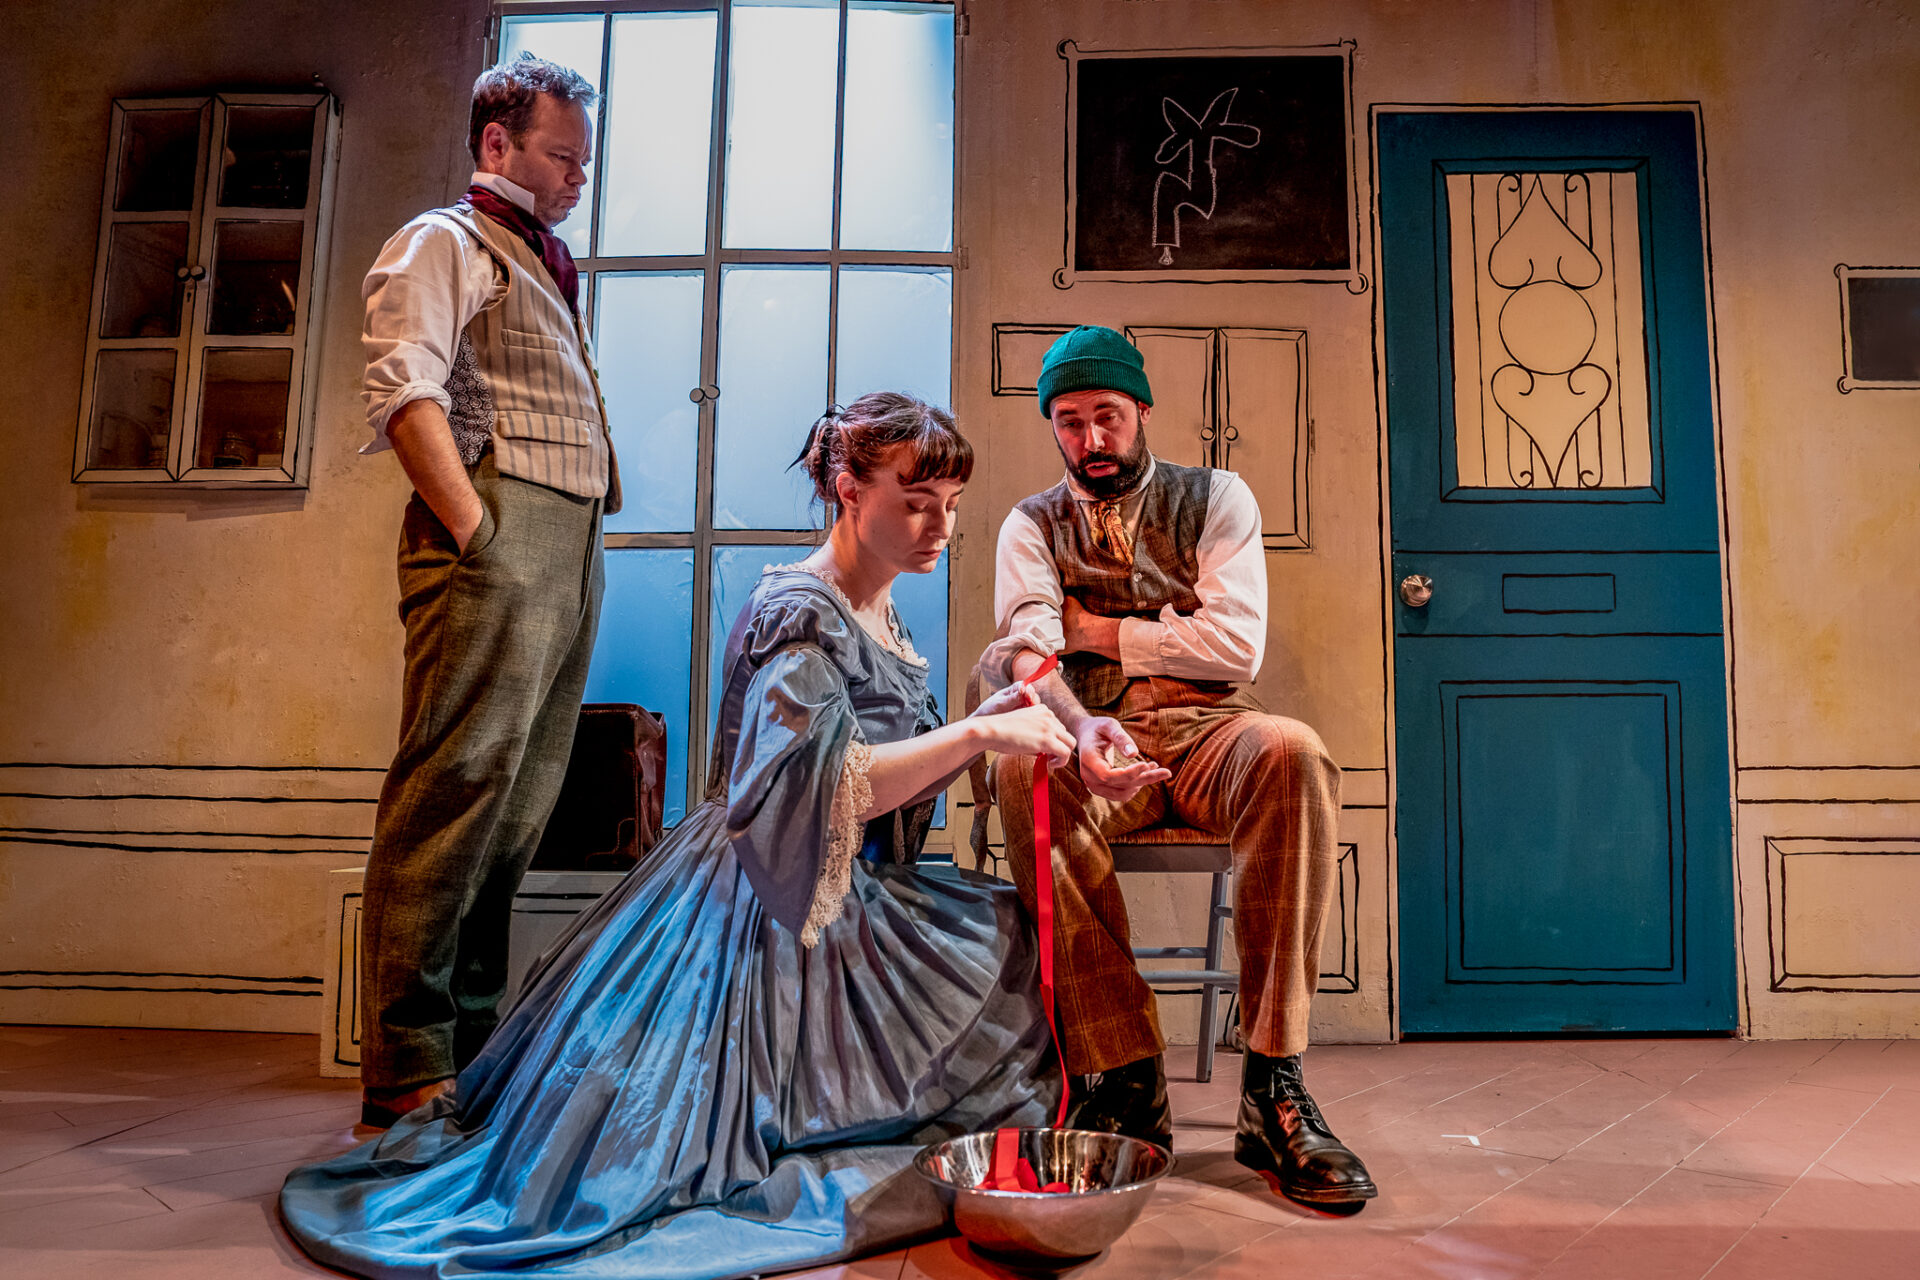 Sam-Alexander-Jennifer-Kirby-Alistair-Cope-in-The-Massive-Tragedy-of-Madame-Bovary_Jermyn-Street-Theatre_Photography-by-Steve-Gregson.jpg